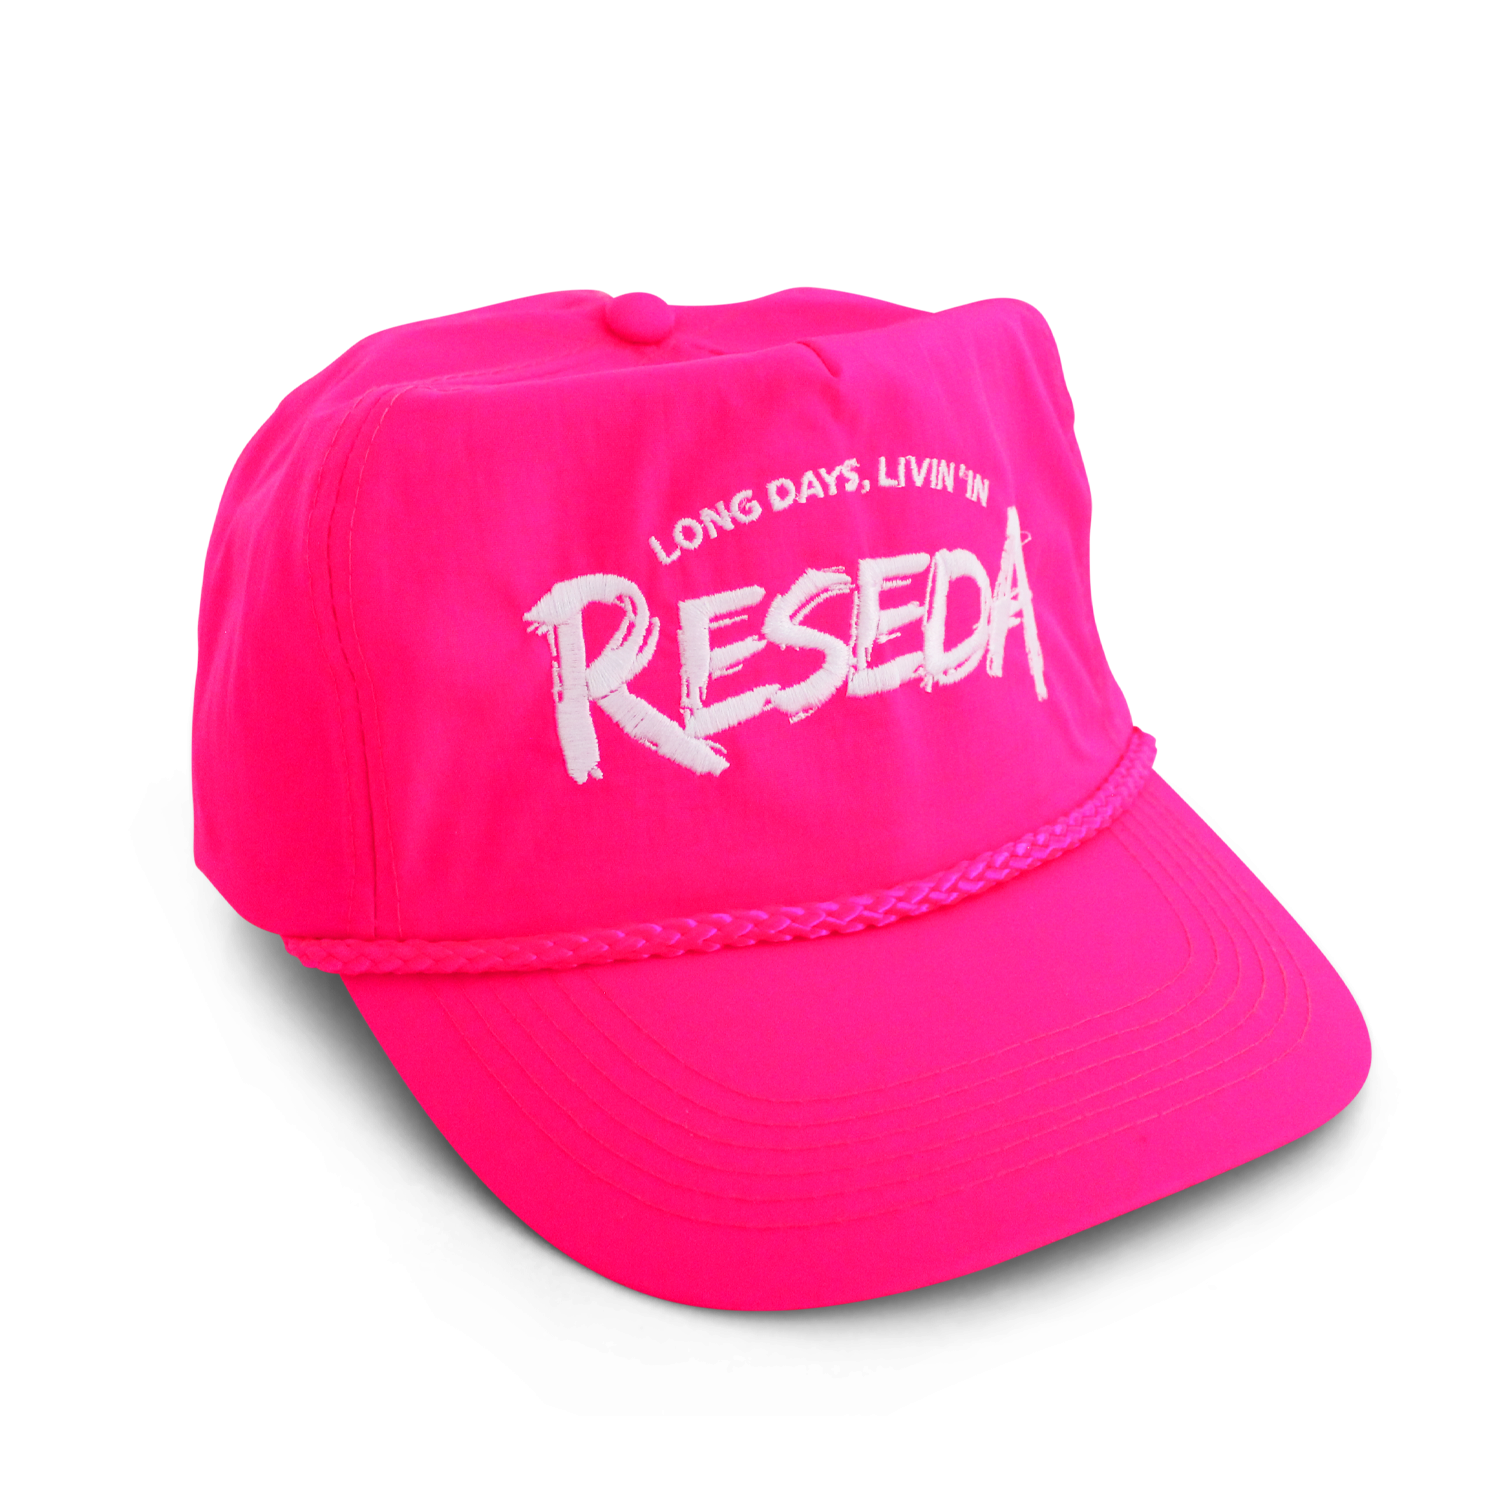 Reseda Pool Deck Hat – A Kid From The Valley